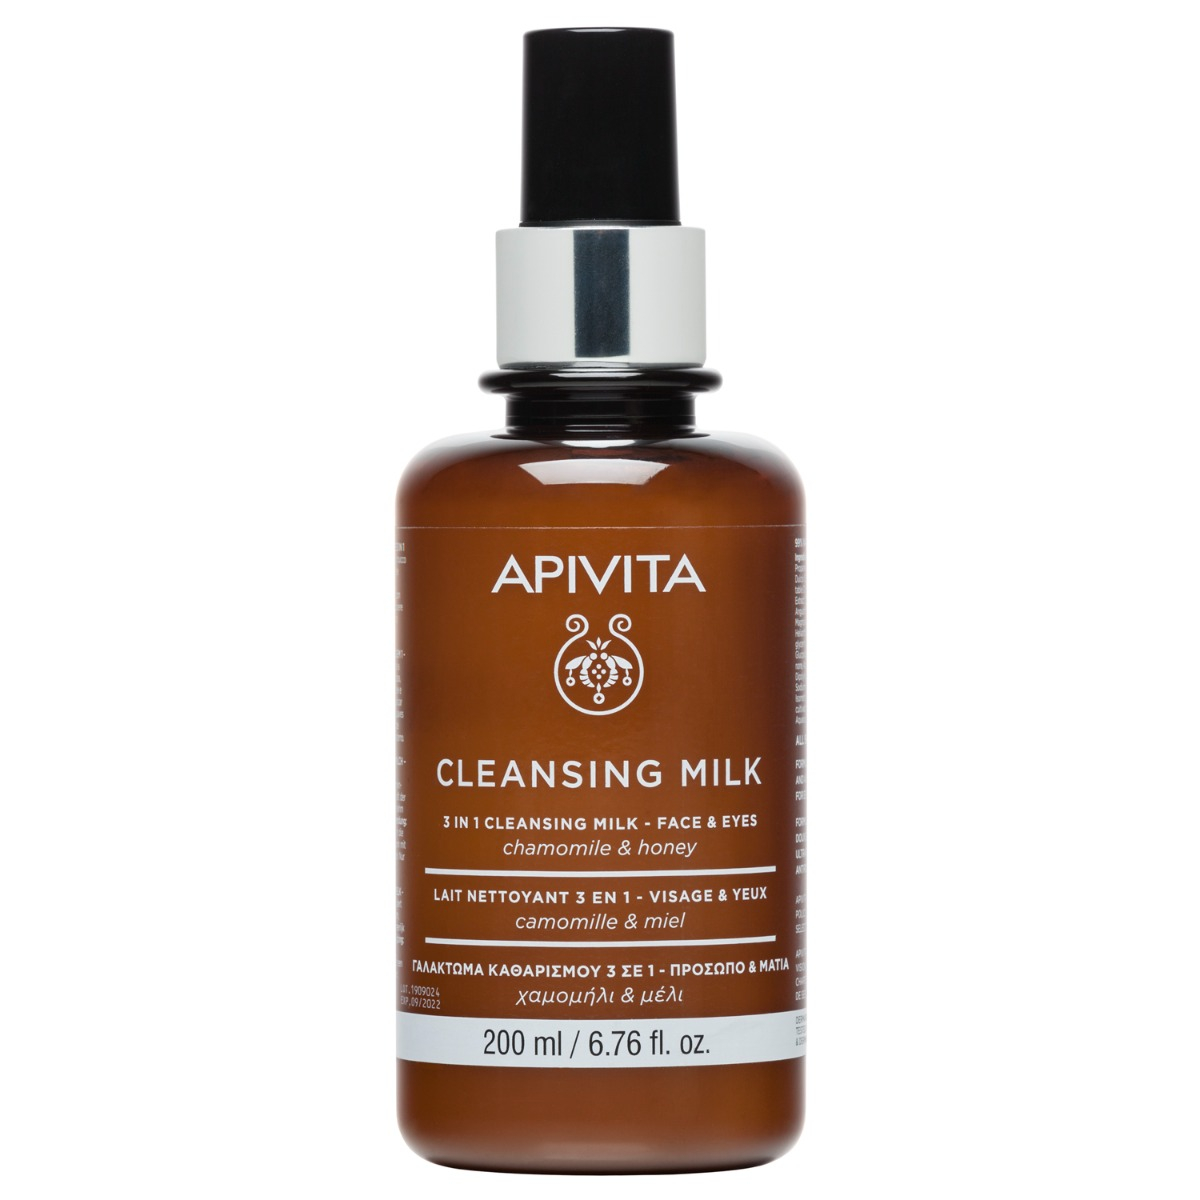 APIVITA 3 in 1 Cleansing Milk with Chamomile and Honey, 200ml